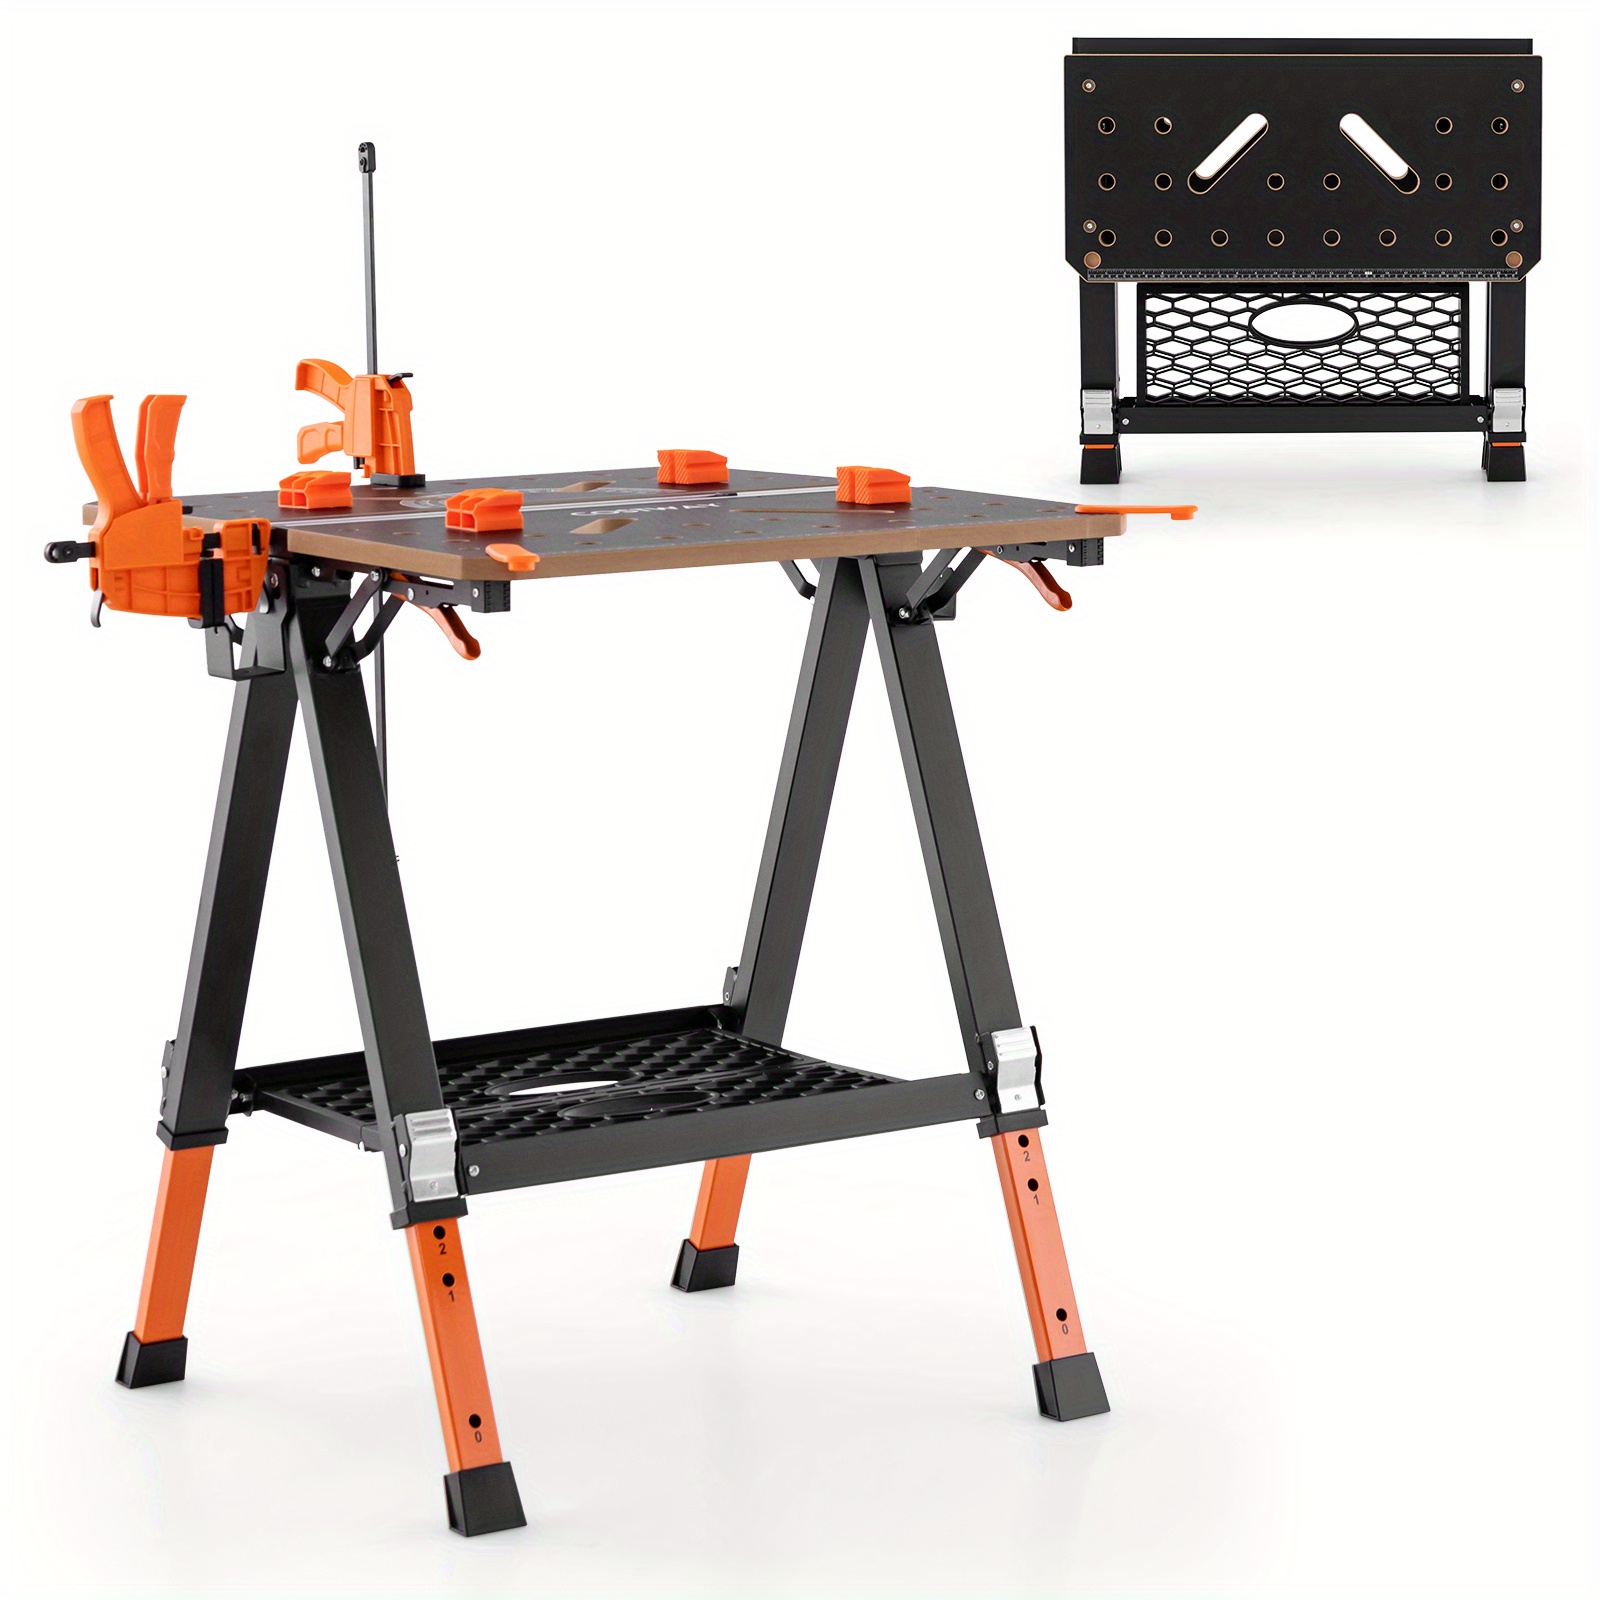 

Lifezeal 2-in-1 Folding Work Table & Sawhorse W/ 2 Quick Clamps & 4 Clamp Dogs Garage